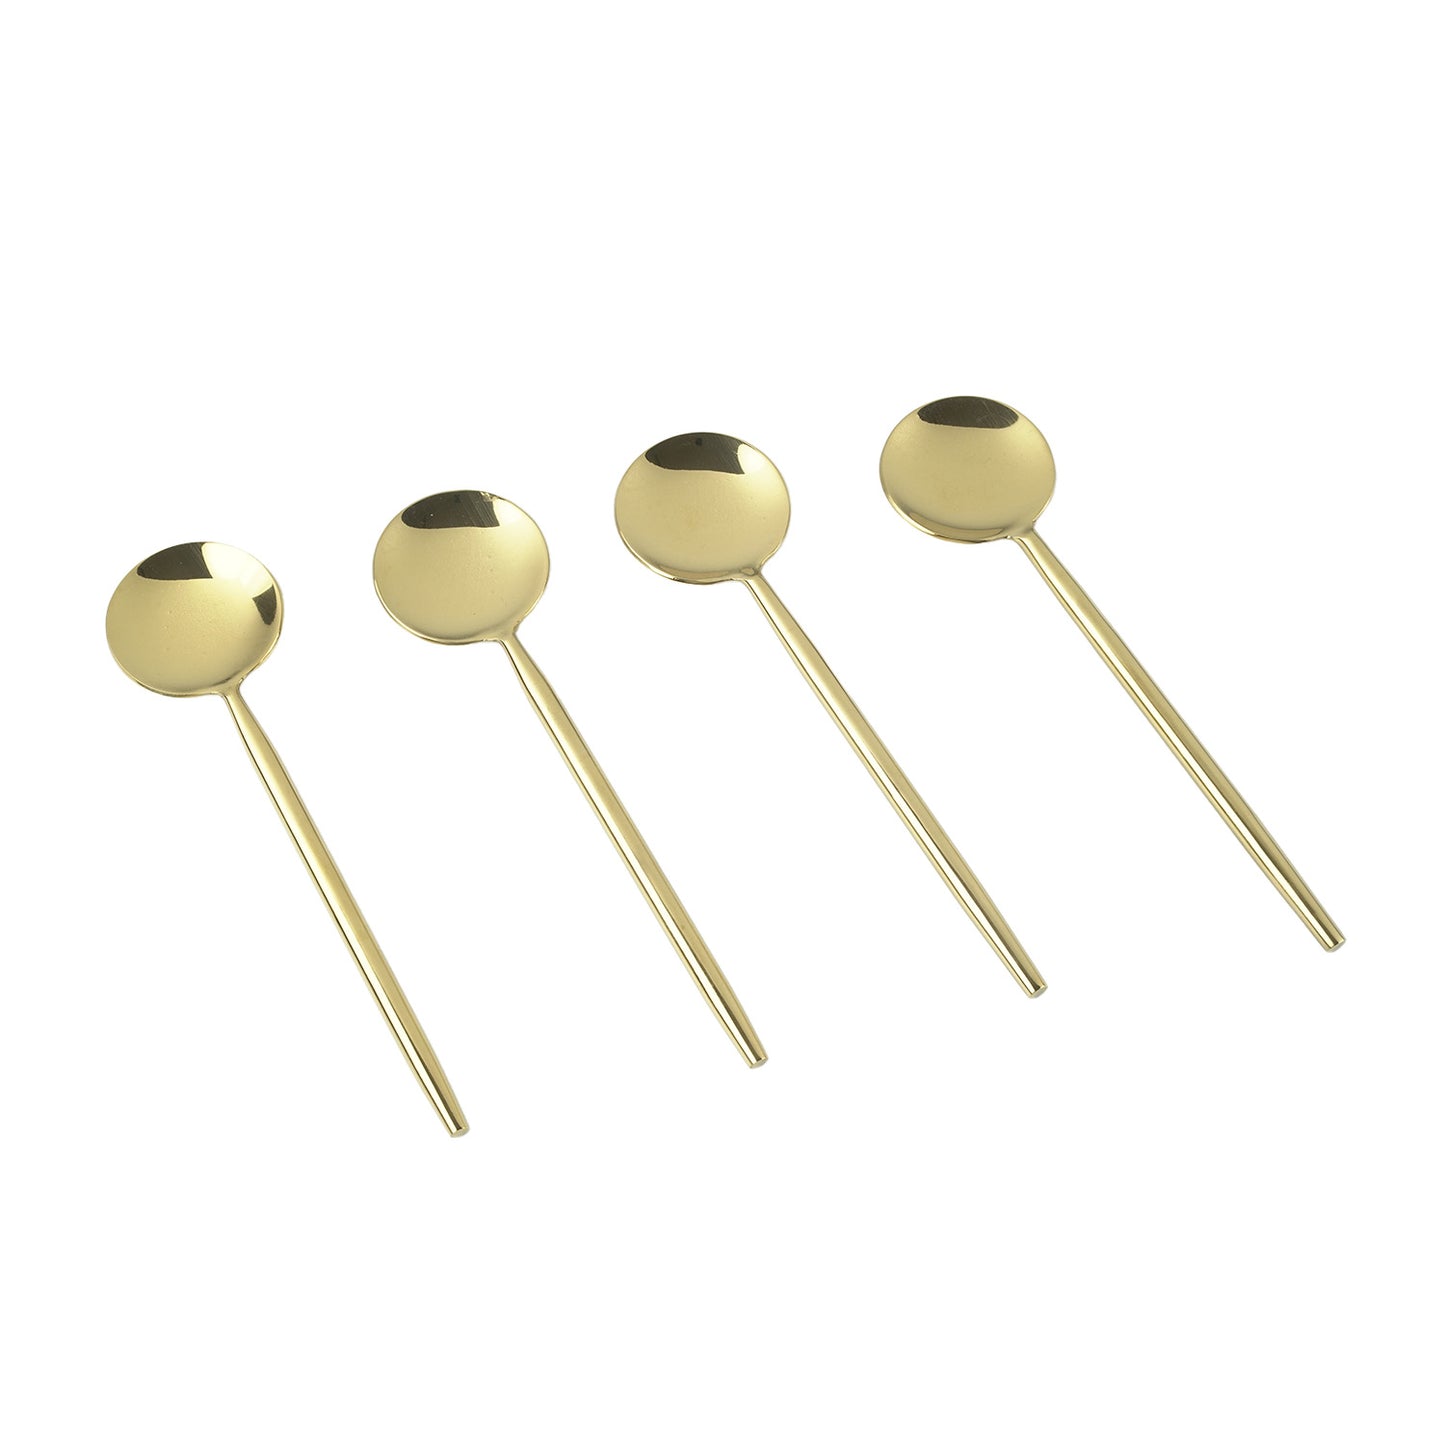 Seher Brass Spoons